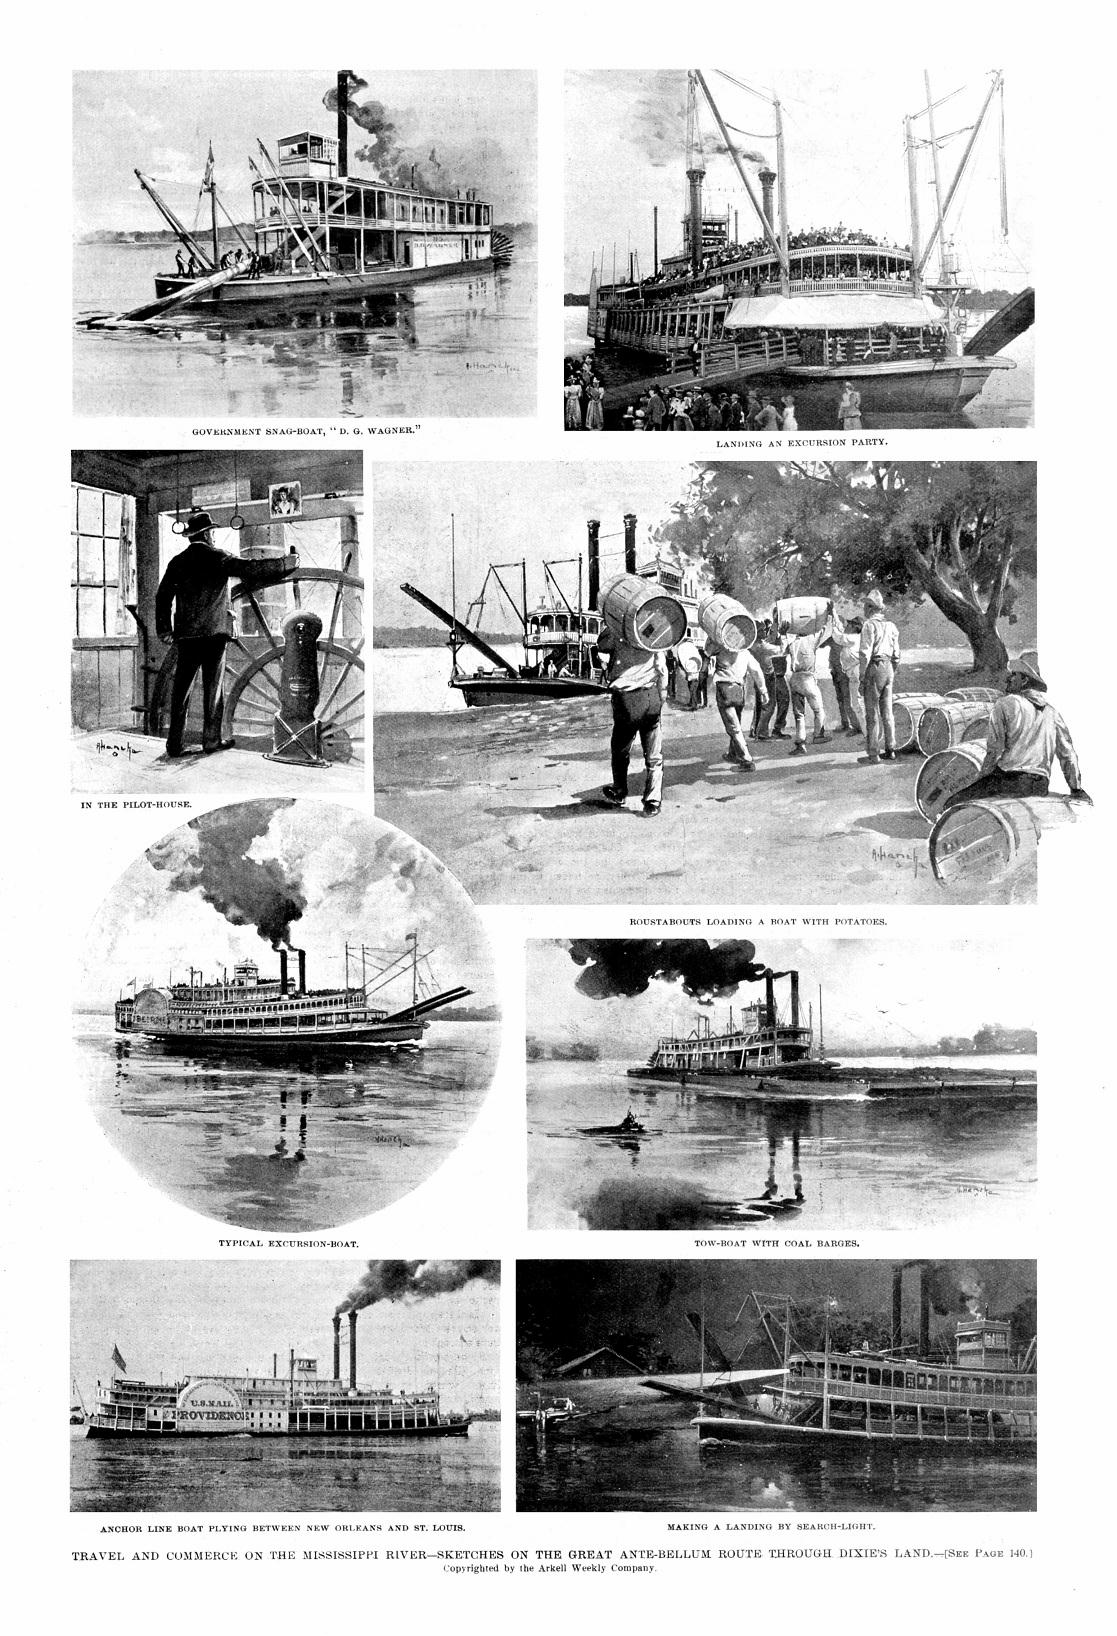 FrankLesliesIllustrated30Aug1894Page35_8Boats45percentSHARE